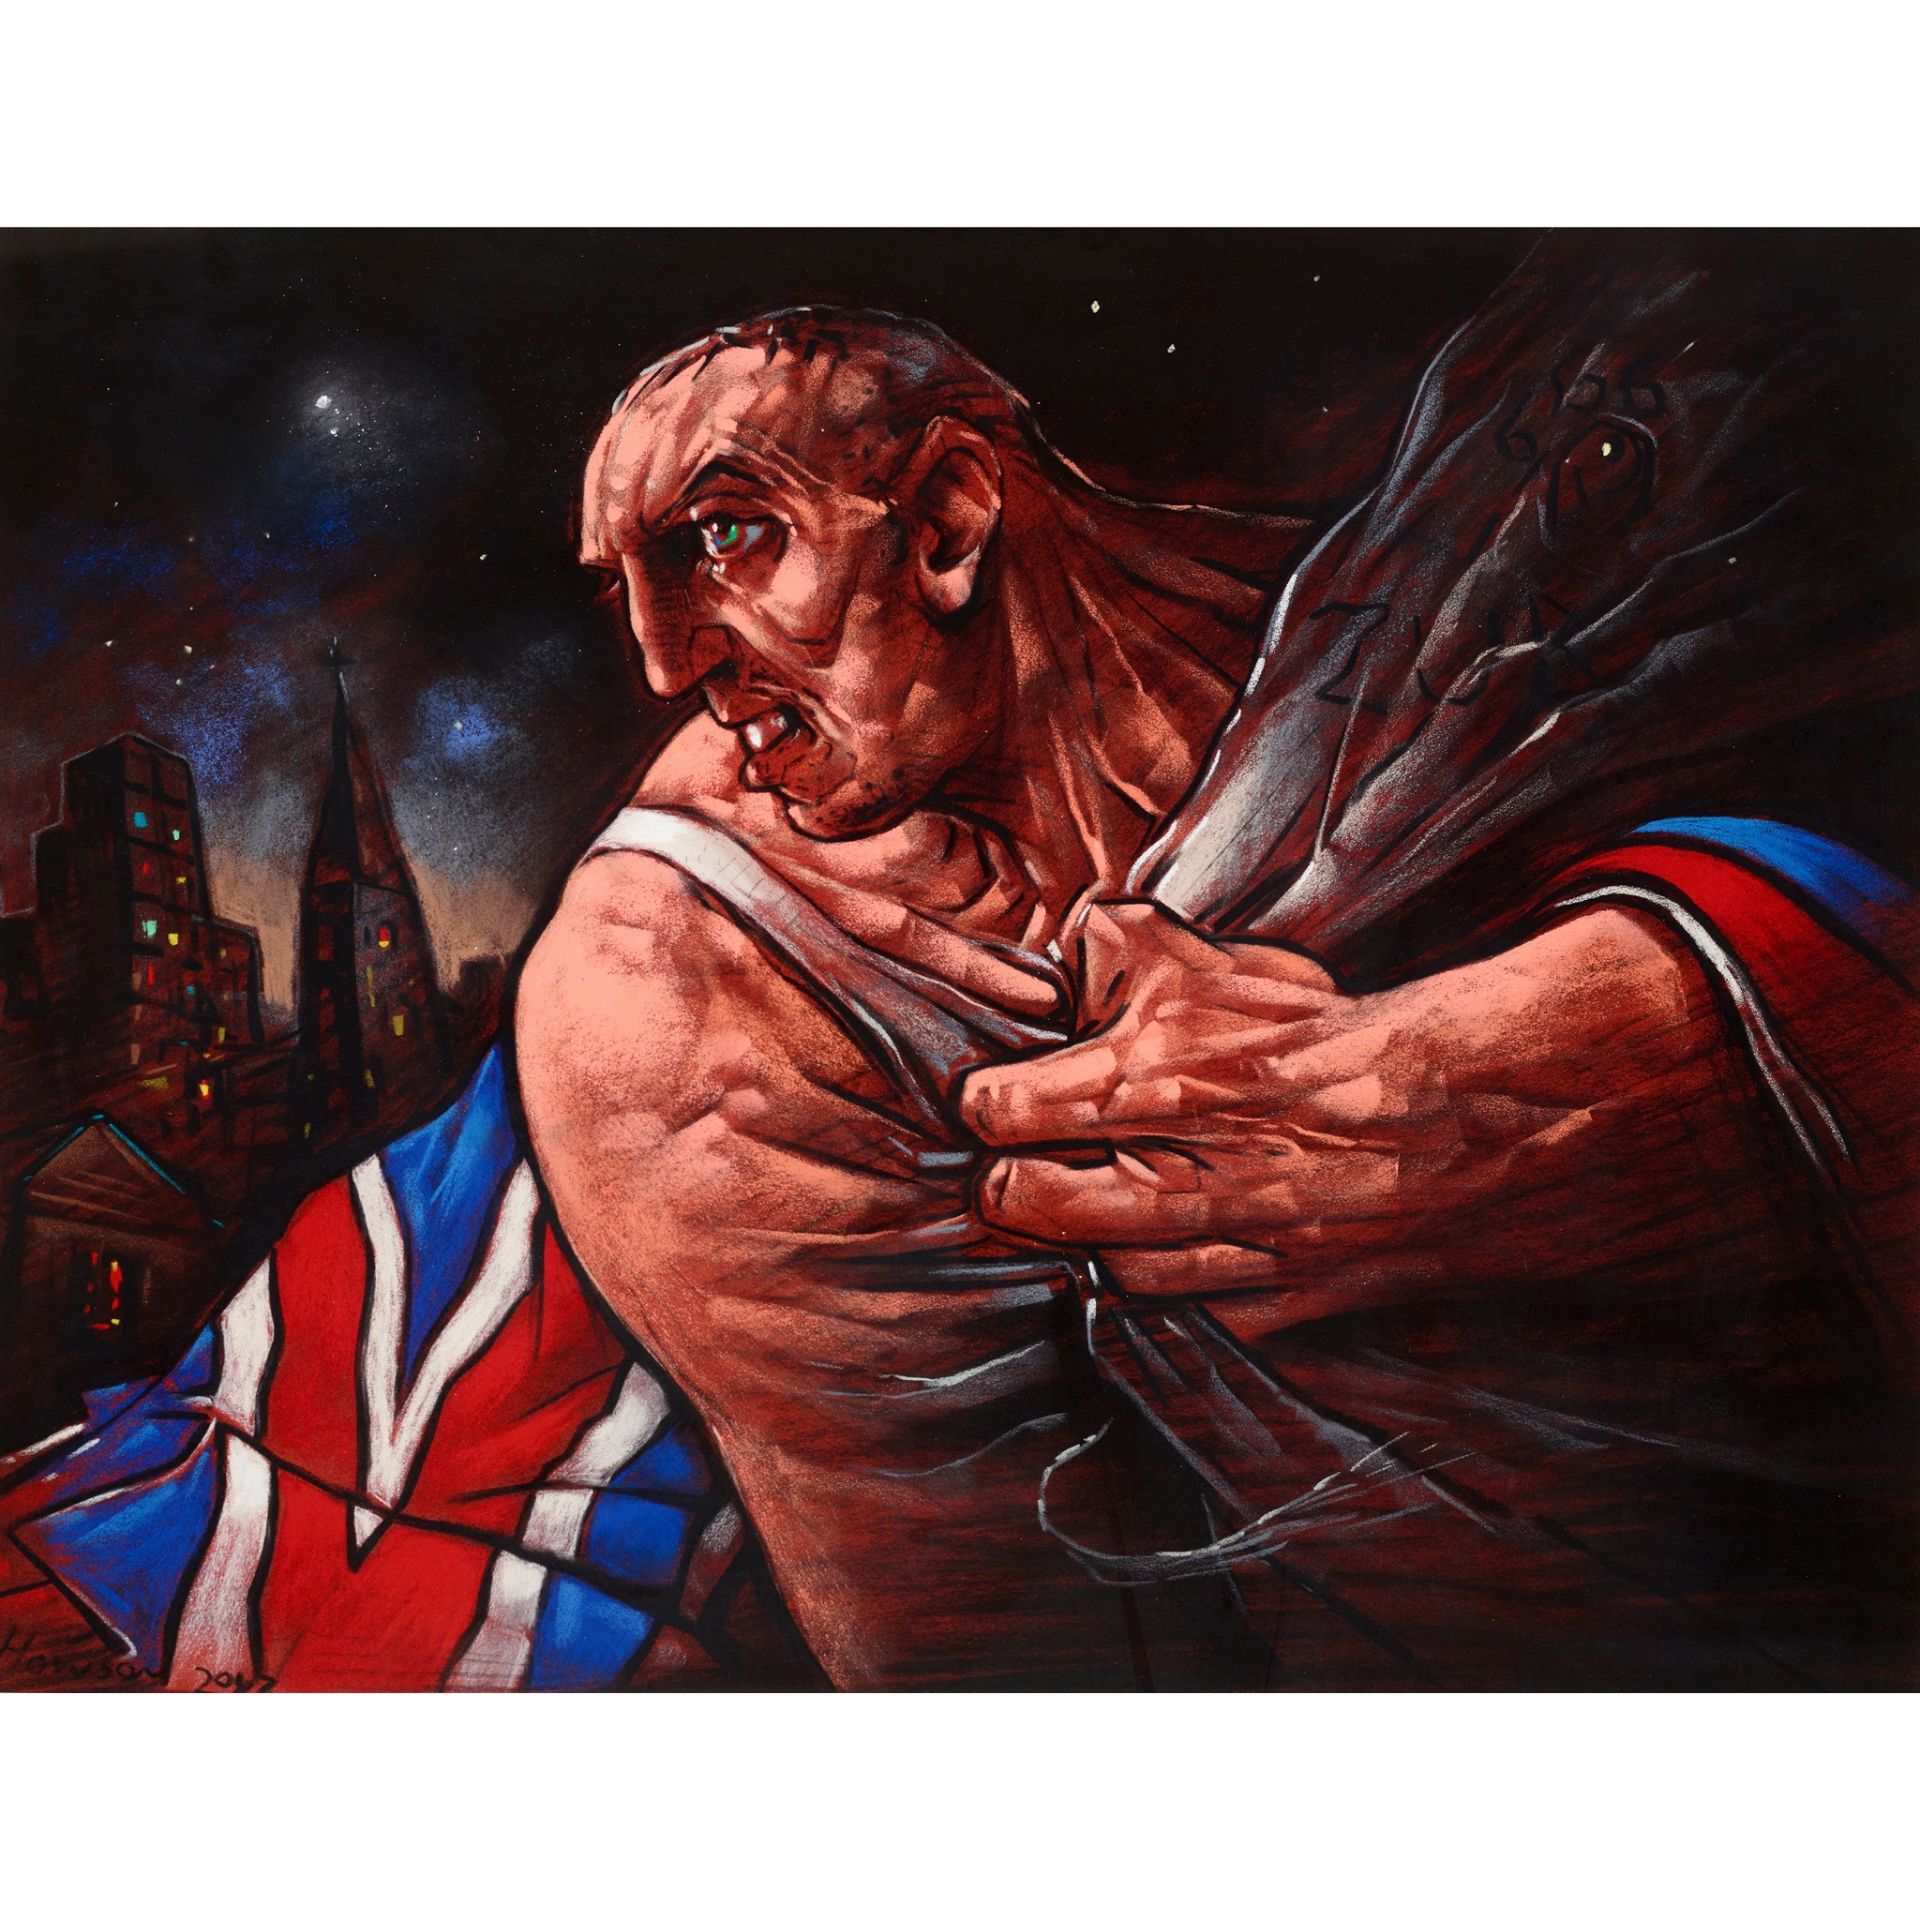 § PETER HOWSON O.B.E. (SCOTTISH 1958-) BREXIT INTO THE ABYSS, 2017